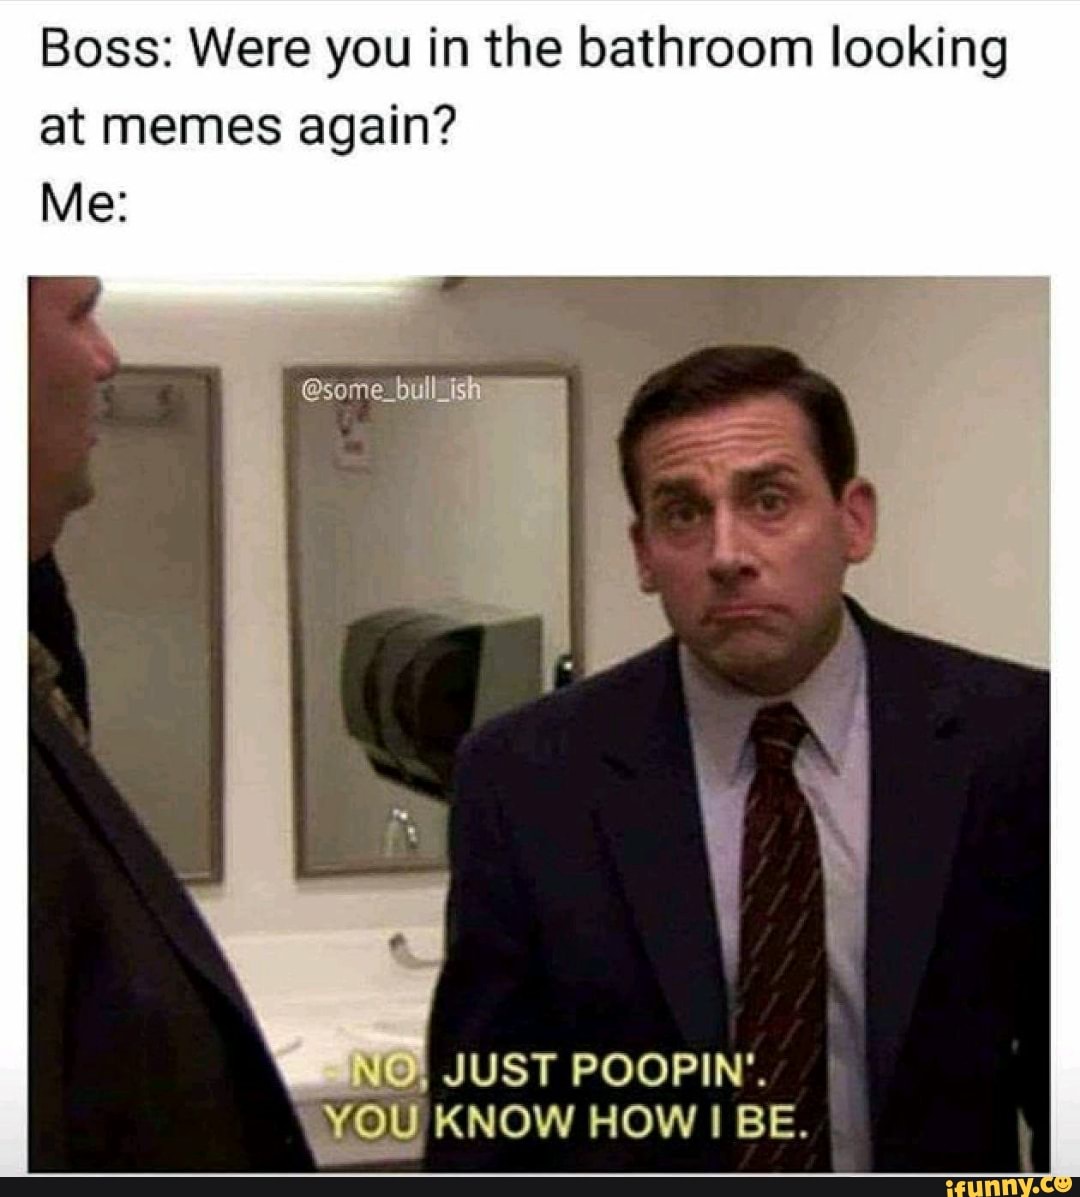 Boss: Were you in the bathroom looking at memes again? Me: JUST POOPIN ...